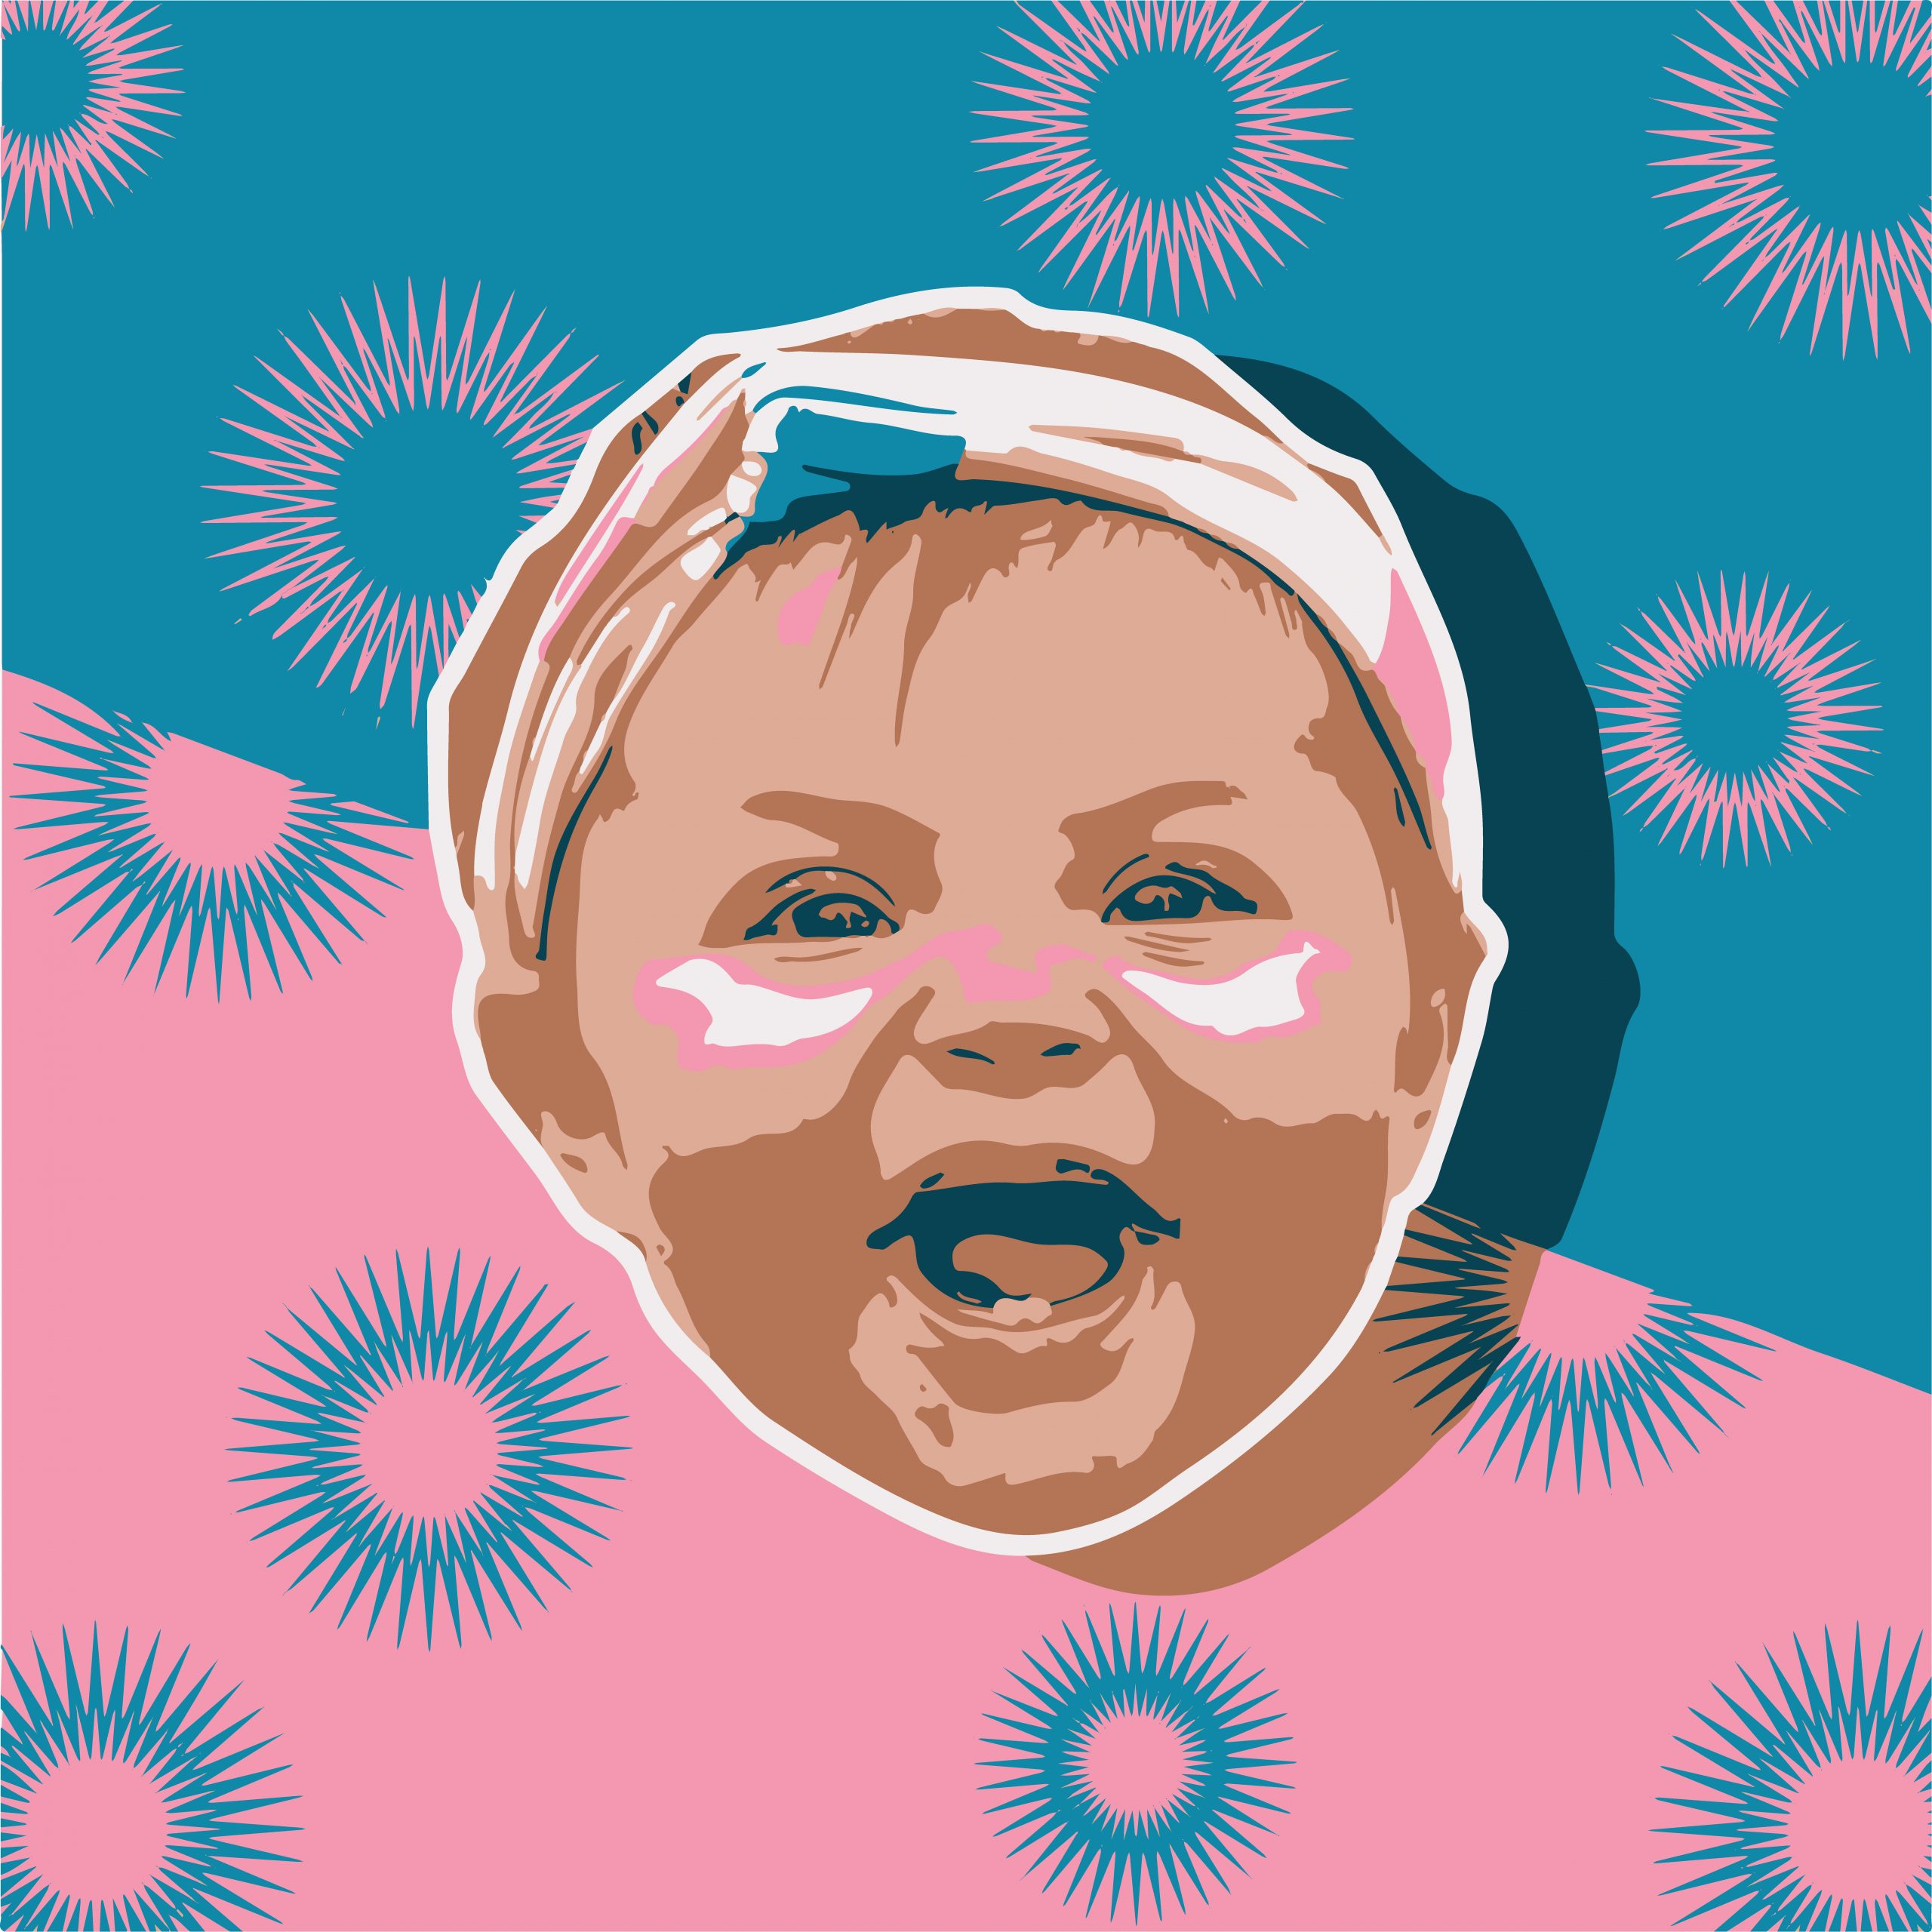 Illustration of a kid's face